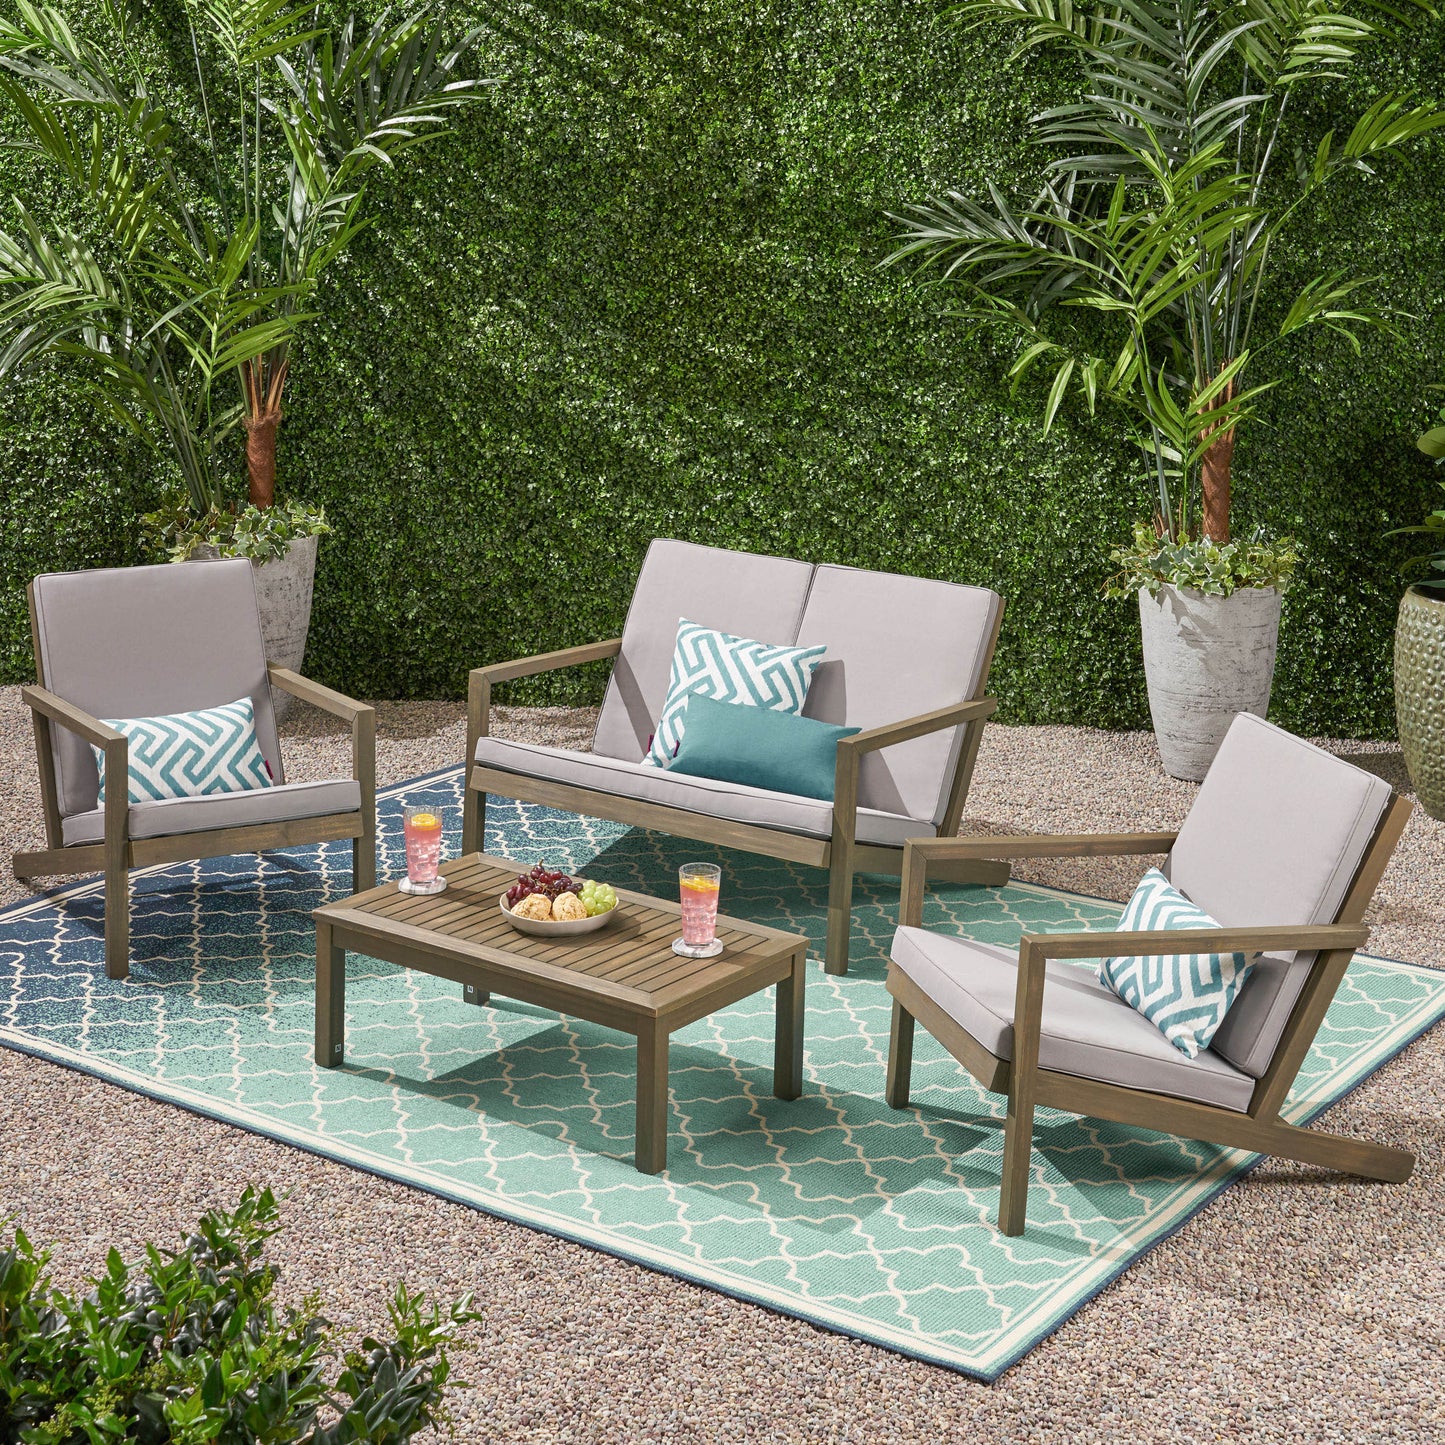 Camryn Outdoor 4 Seater Chat Set with Cushions